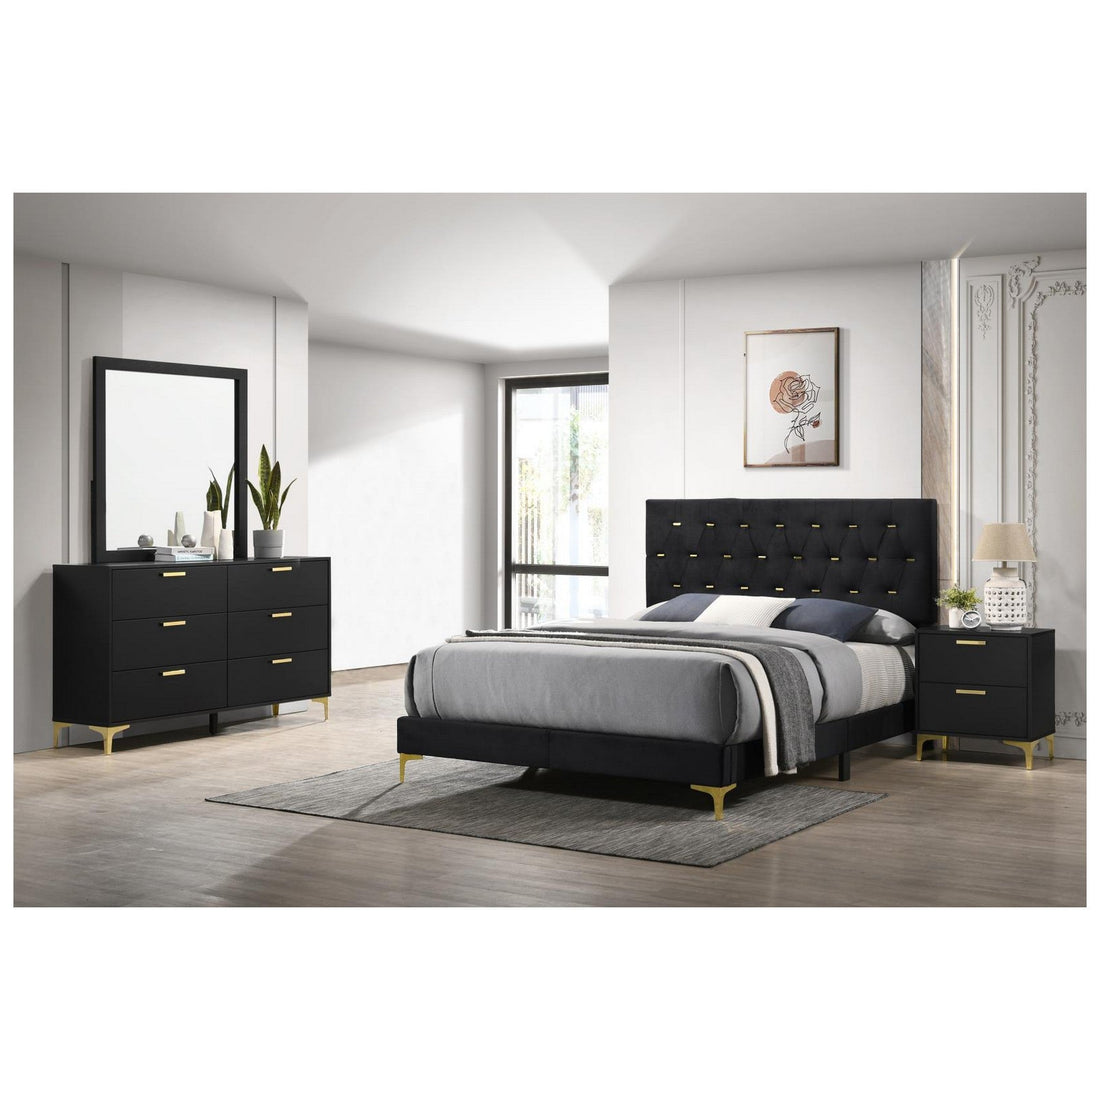 Kendall 4-piece Tufted Panel Queen Bedroom Set Black and Gold 224451Q-S4